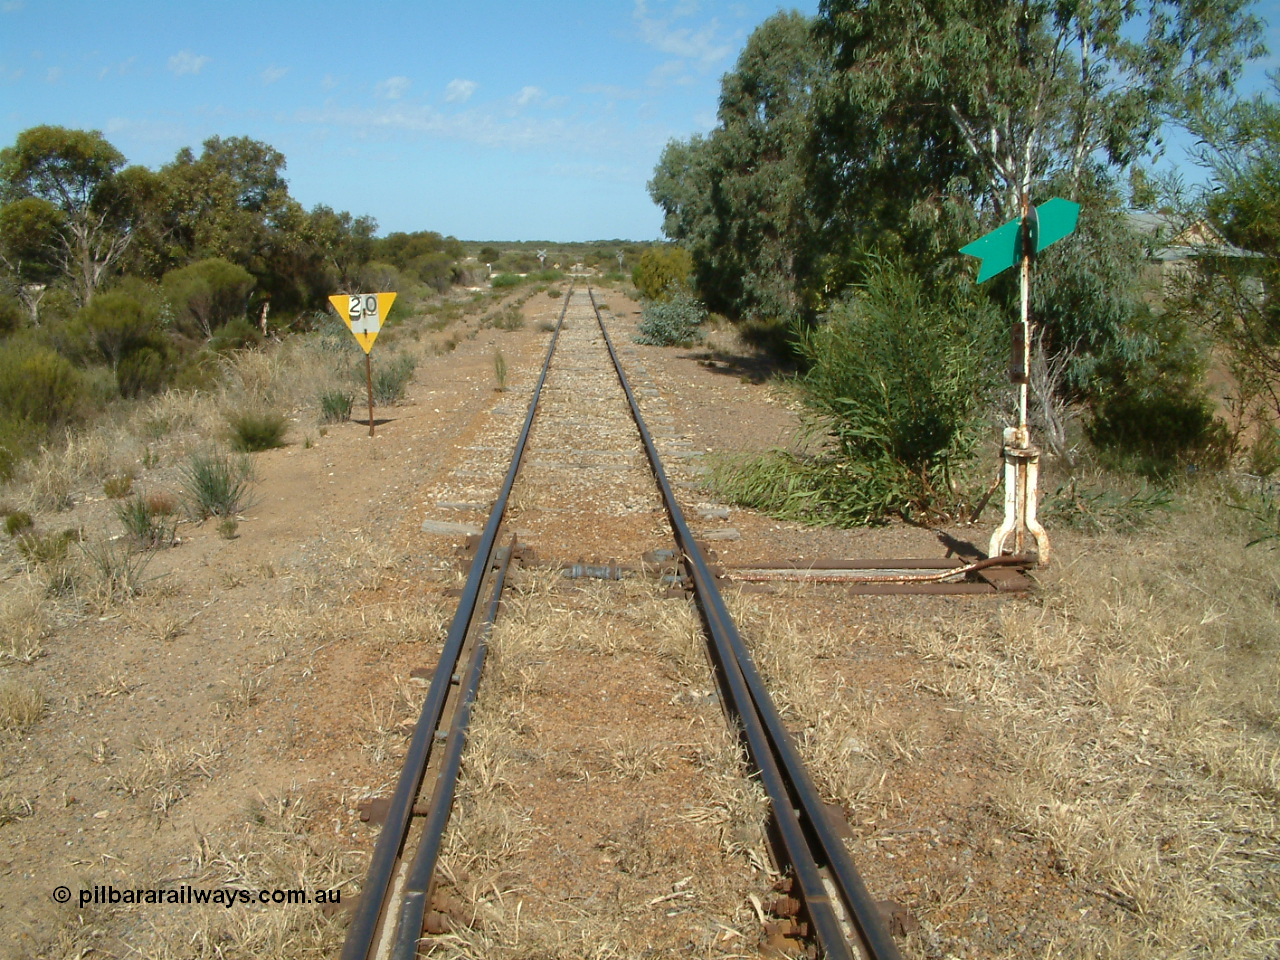 030406 142610
Kapinnie, track view looking east towards Yeelanna from the eastern end yard points with grade crossing and 20 km/h speed board. 6th April 2003.
